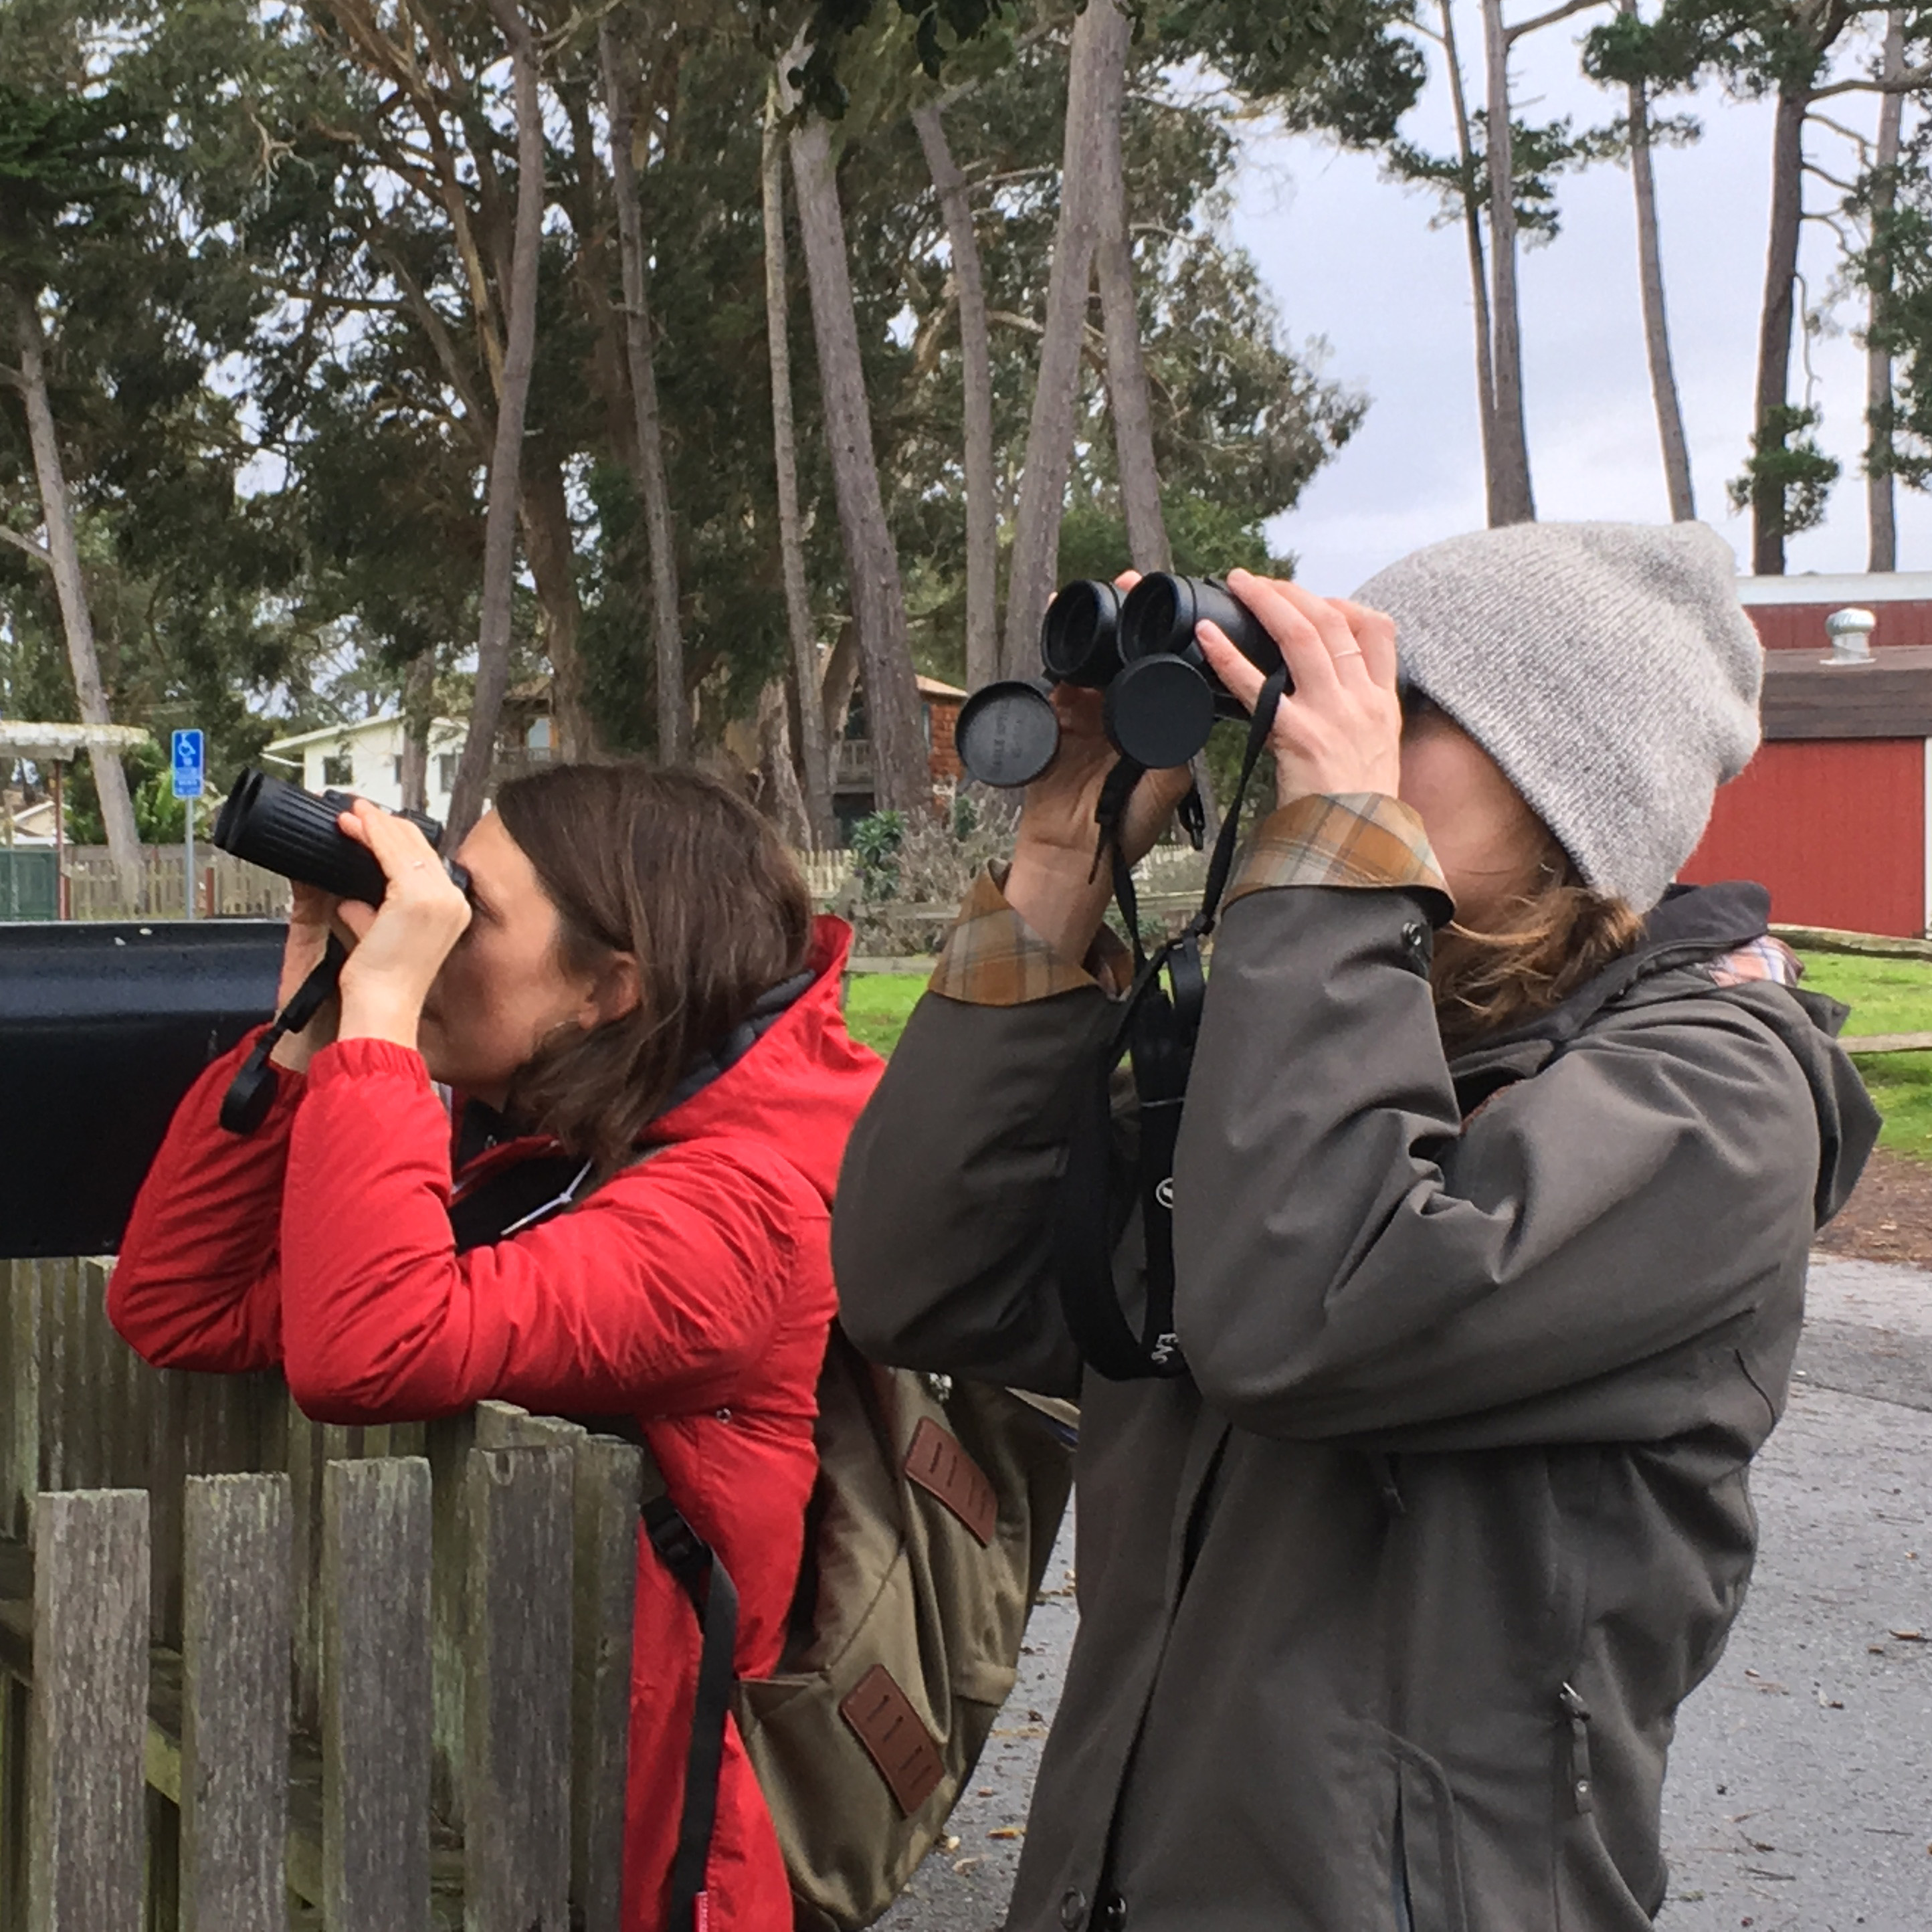 Two women lean against a wooden fence as they gaze at monarchs (which are outside the frame) with binoculars.